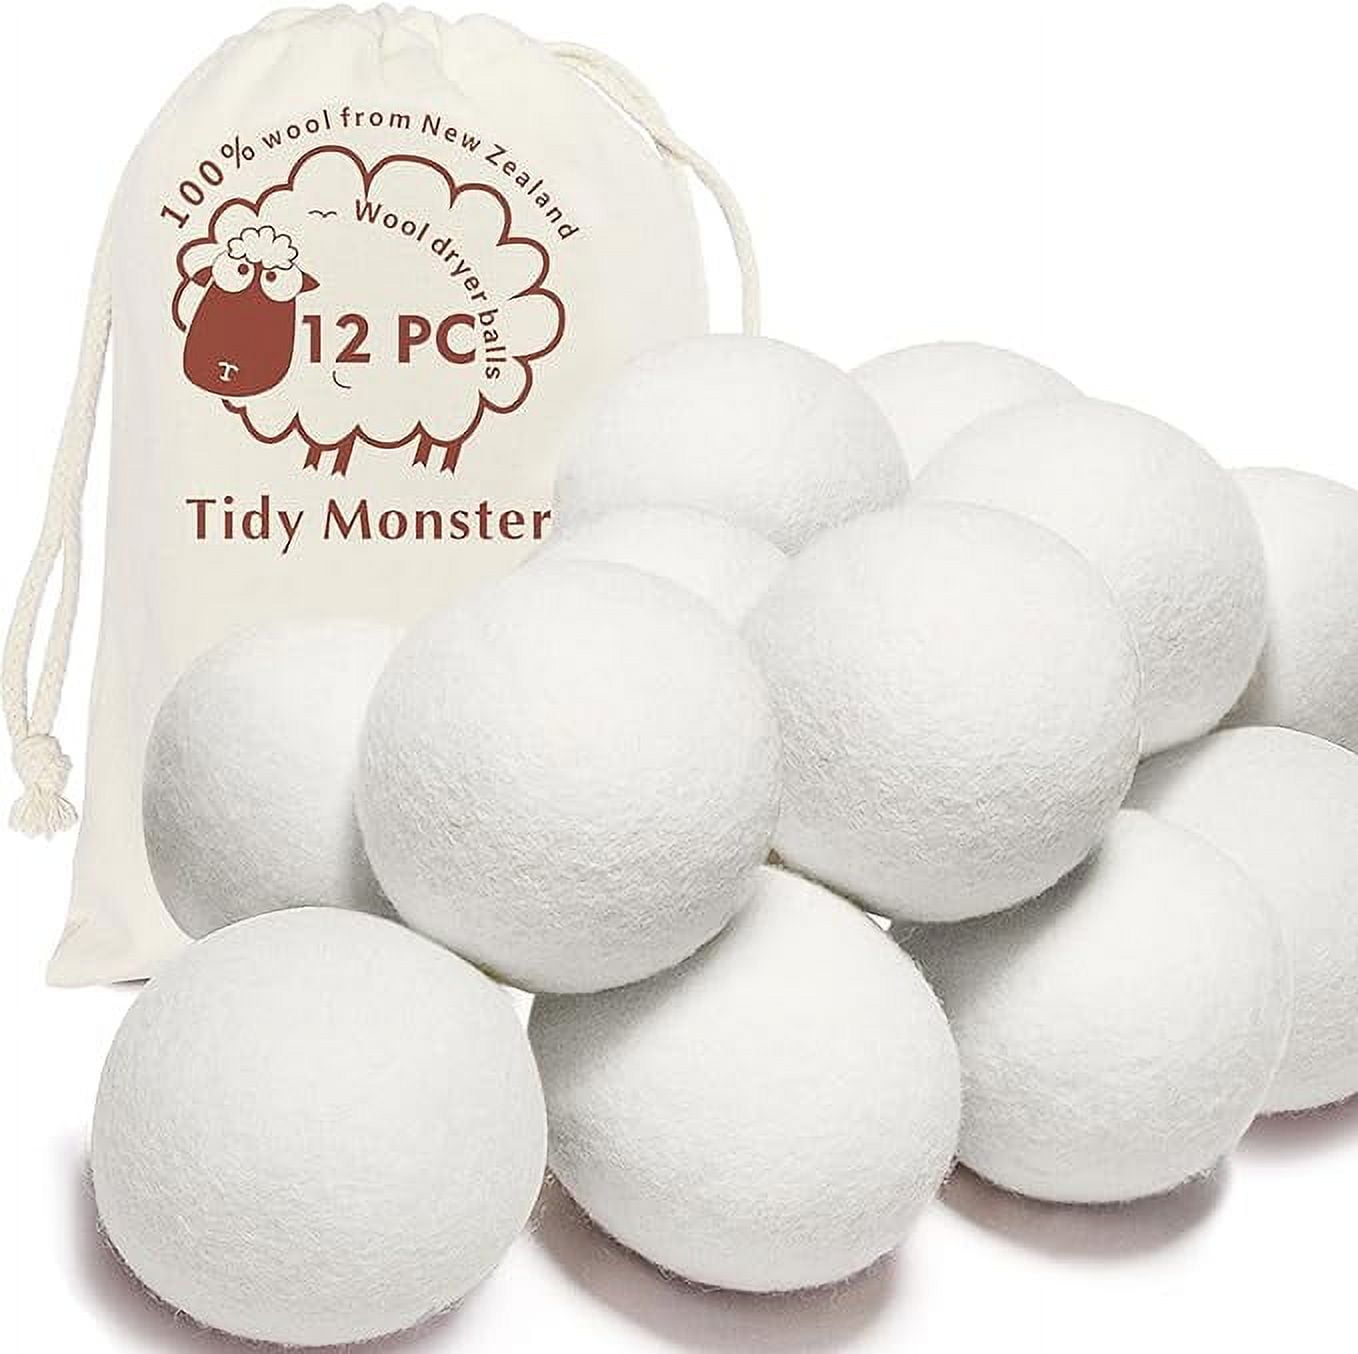 6 Pack All Natural Organic Wool Dryer Balls XL Size - Reusable Chemical  Free Natural Fabric Softener, Anti Static, Reduces Clothing Wrinkles and  Saves